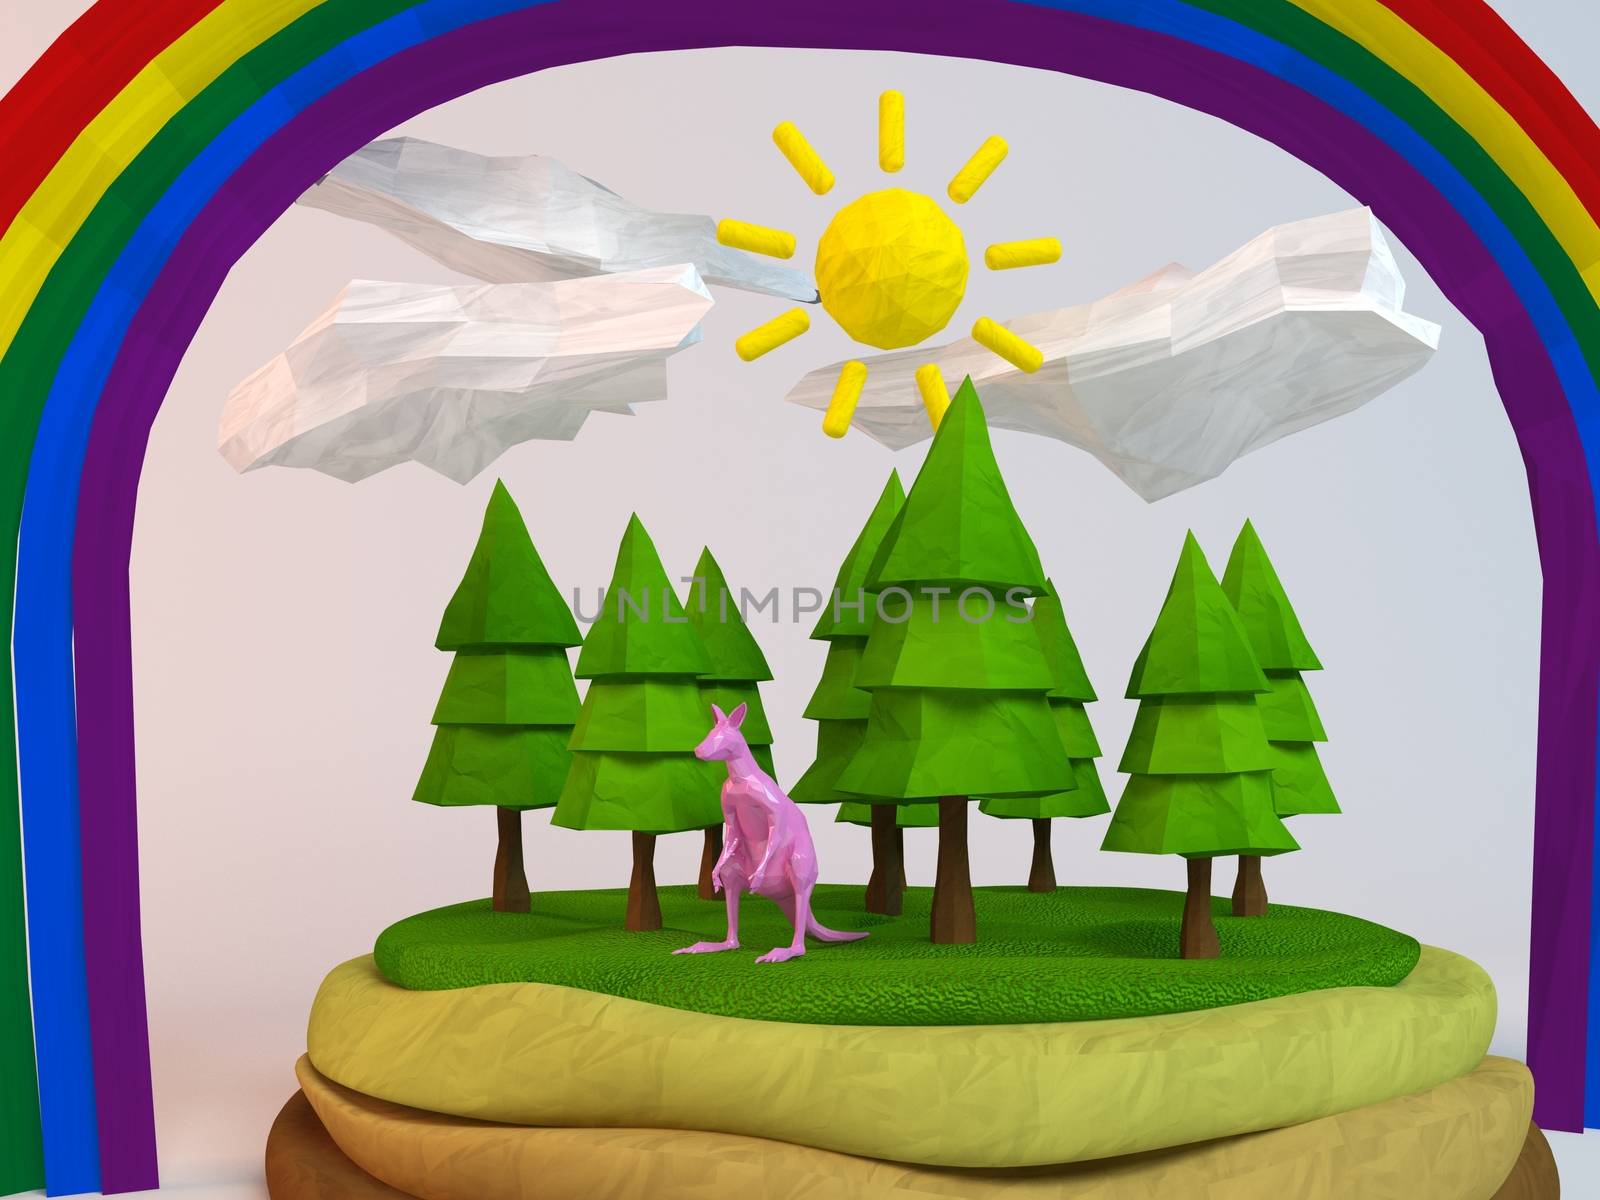 3d kangaroo inside a low-poly green scene with sun, trees, clouds and a rainbow